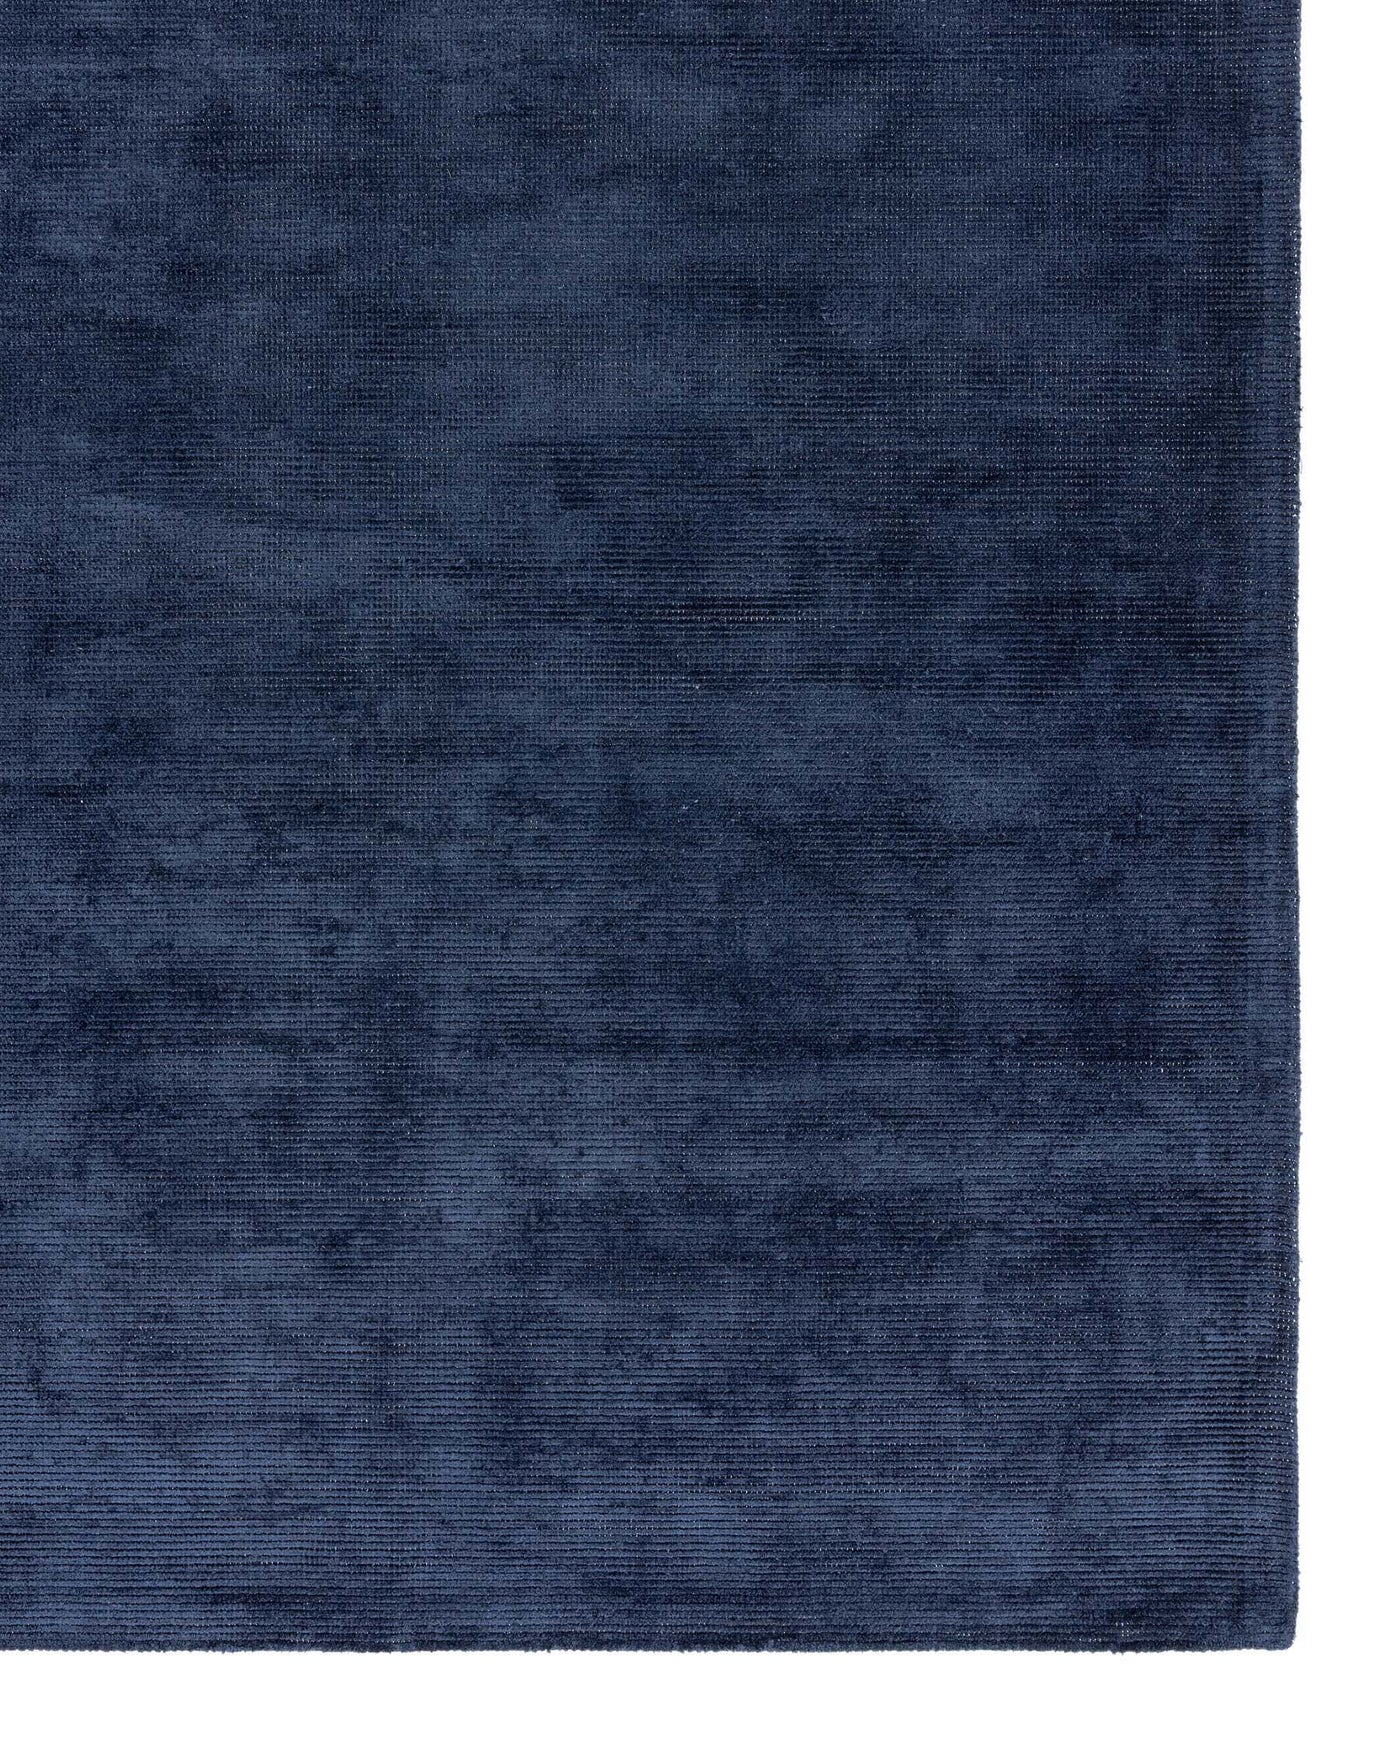 Luxurious navy blue area rug with a subtle woven texture, adding depth and sophistication to any room decor.